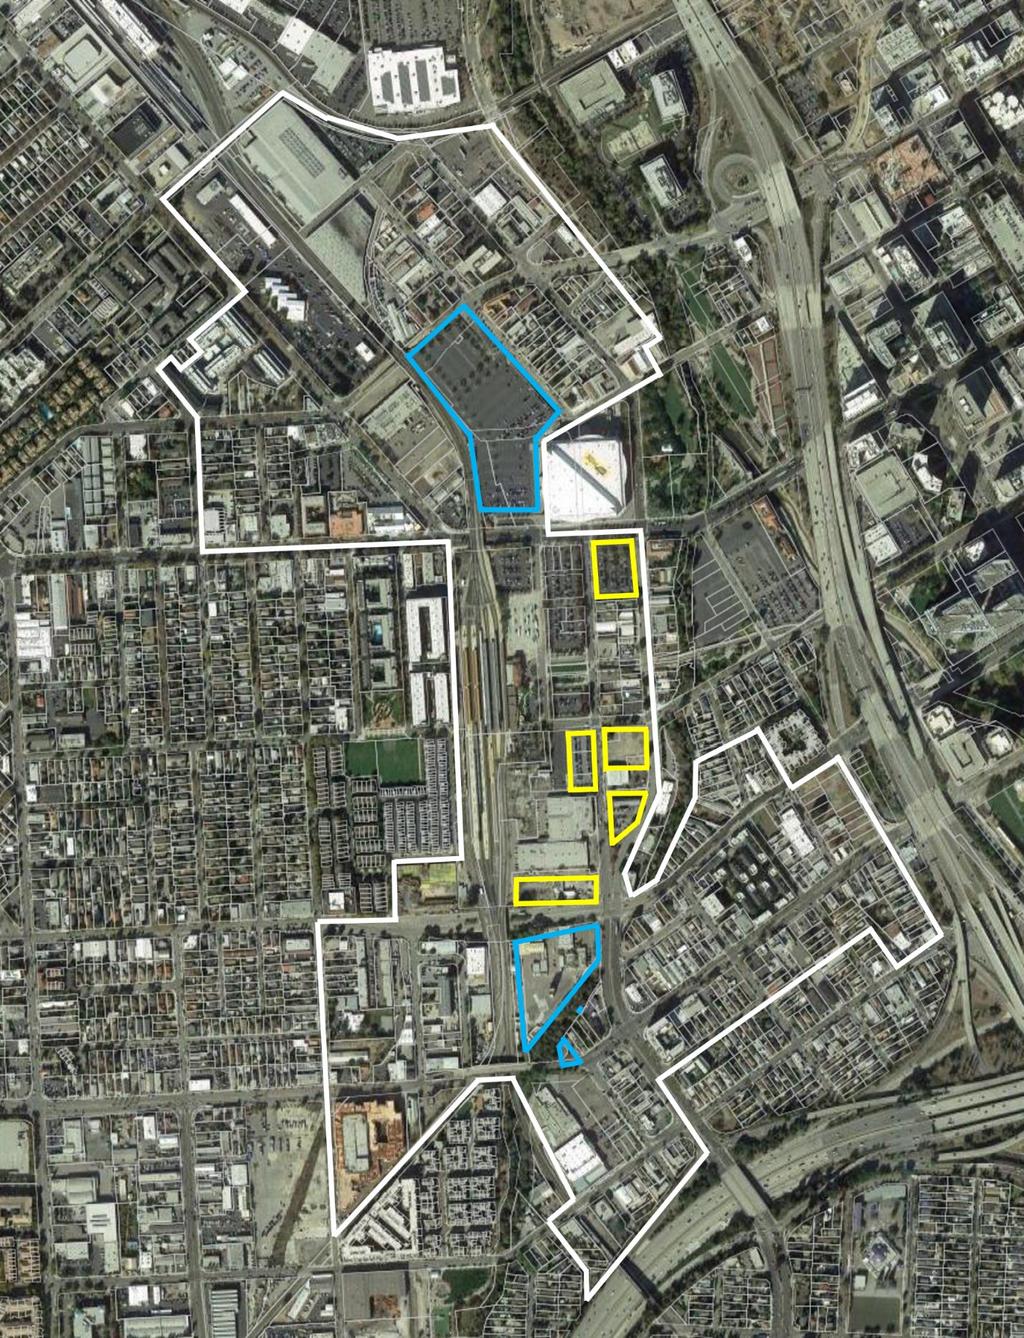 Location of City and SARA Parcels in Diridon Station Area 8 S. Montgomery St. 70,451 s.f. / 1.62 ac. (A.k.a. Lot D ) APN: 259-38-130 105 S. Montgomery St. 43,803 s.f. / 1 ac.